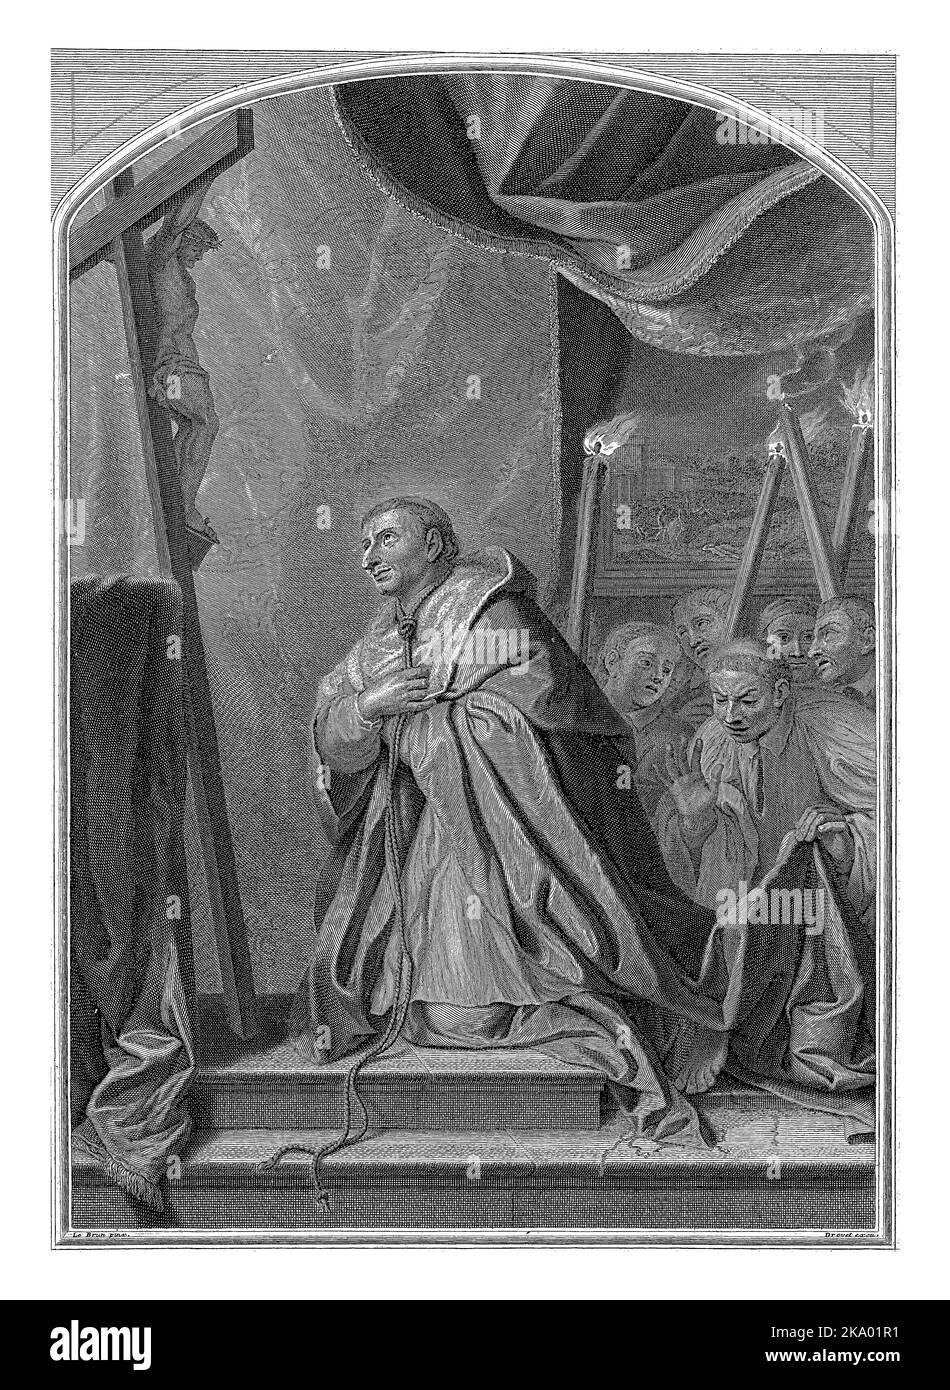 Saint Charles Borromeo, anonymous, after Gerard Edelinck, after Charles Le Brun, 1666 - 1757 Saint Charles Borromeo barefoot and tied around the neck Stock Photo